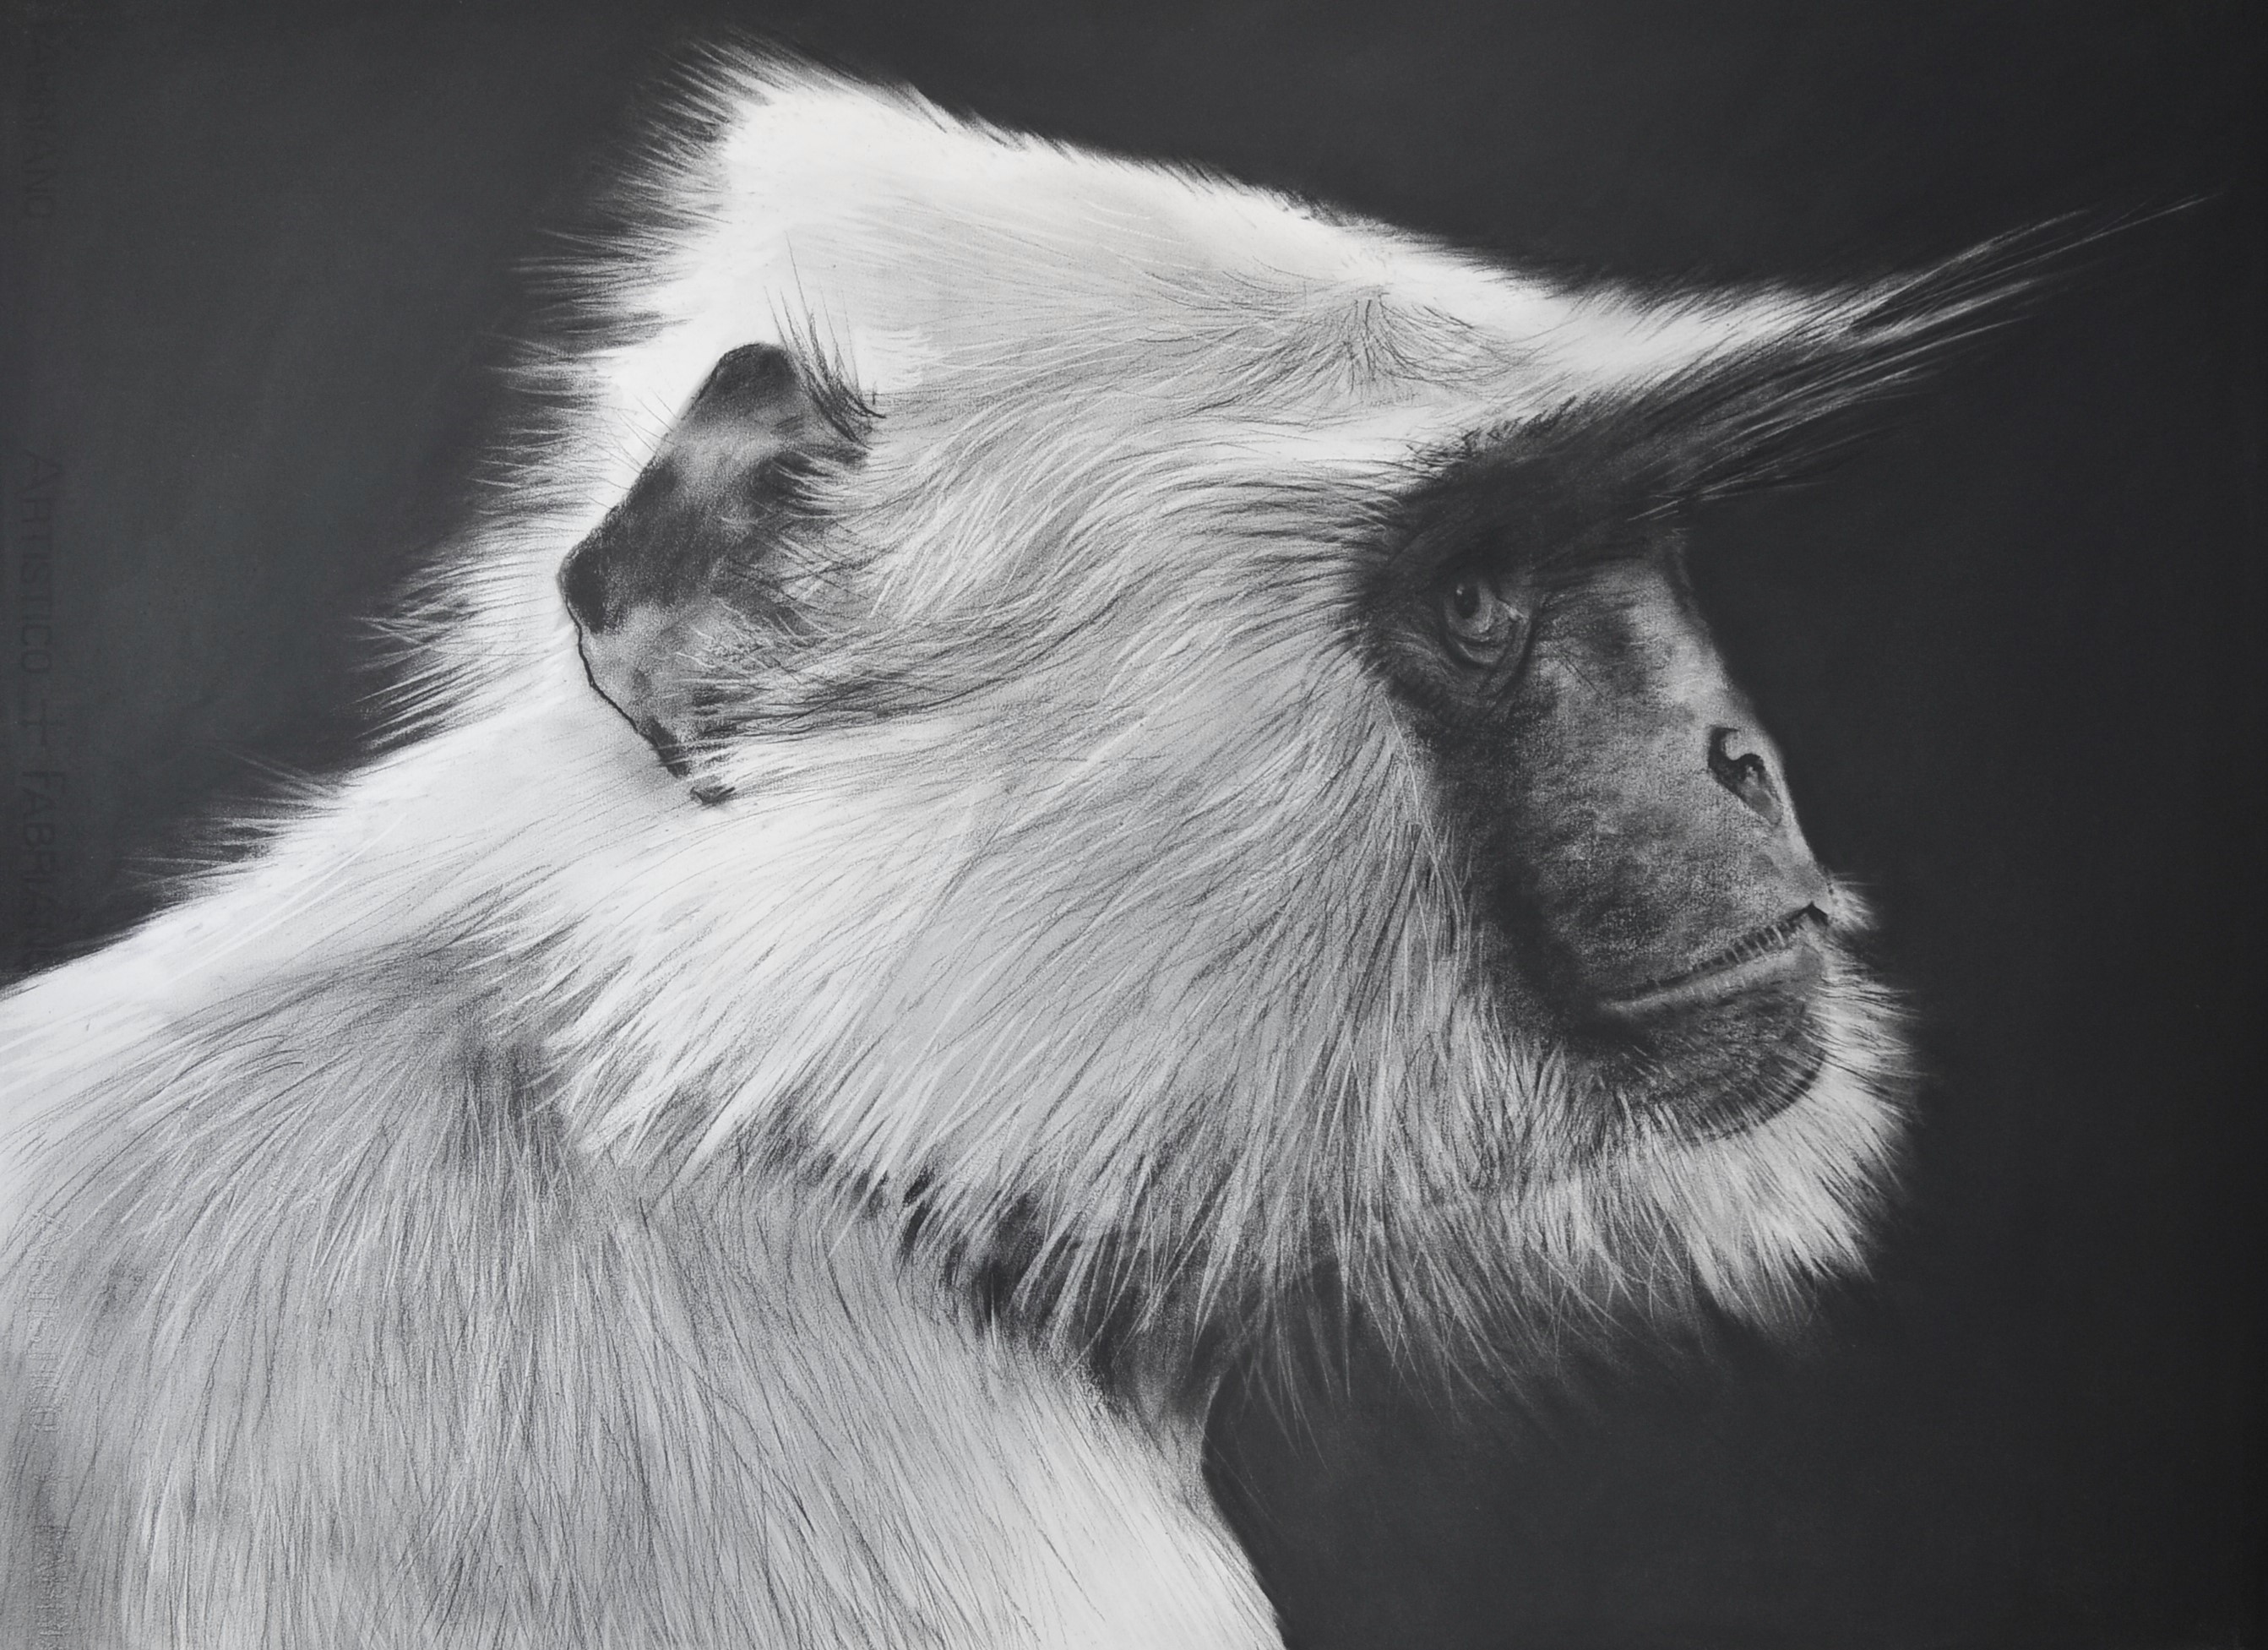 Charcoal drawing of a langur monkey